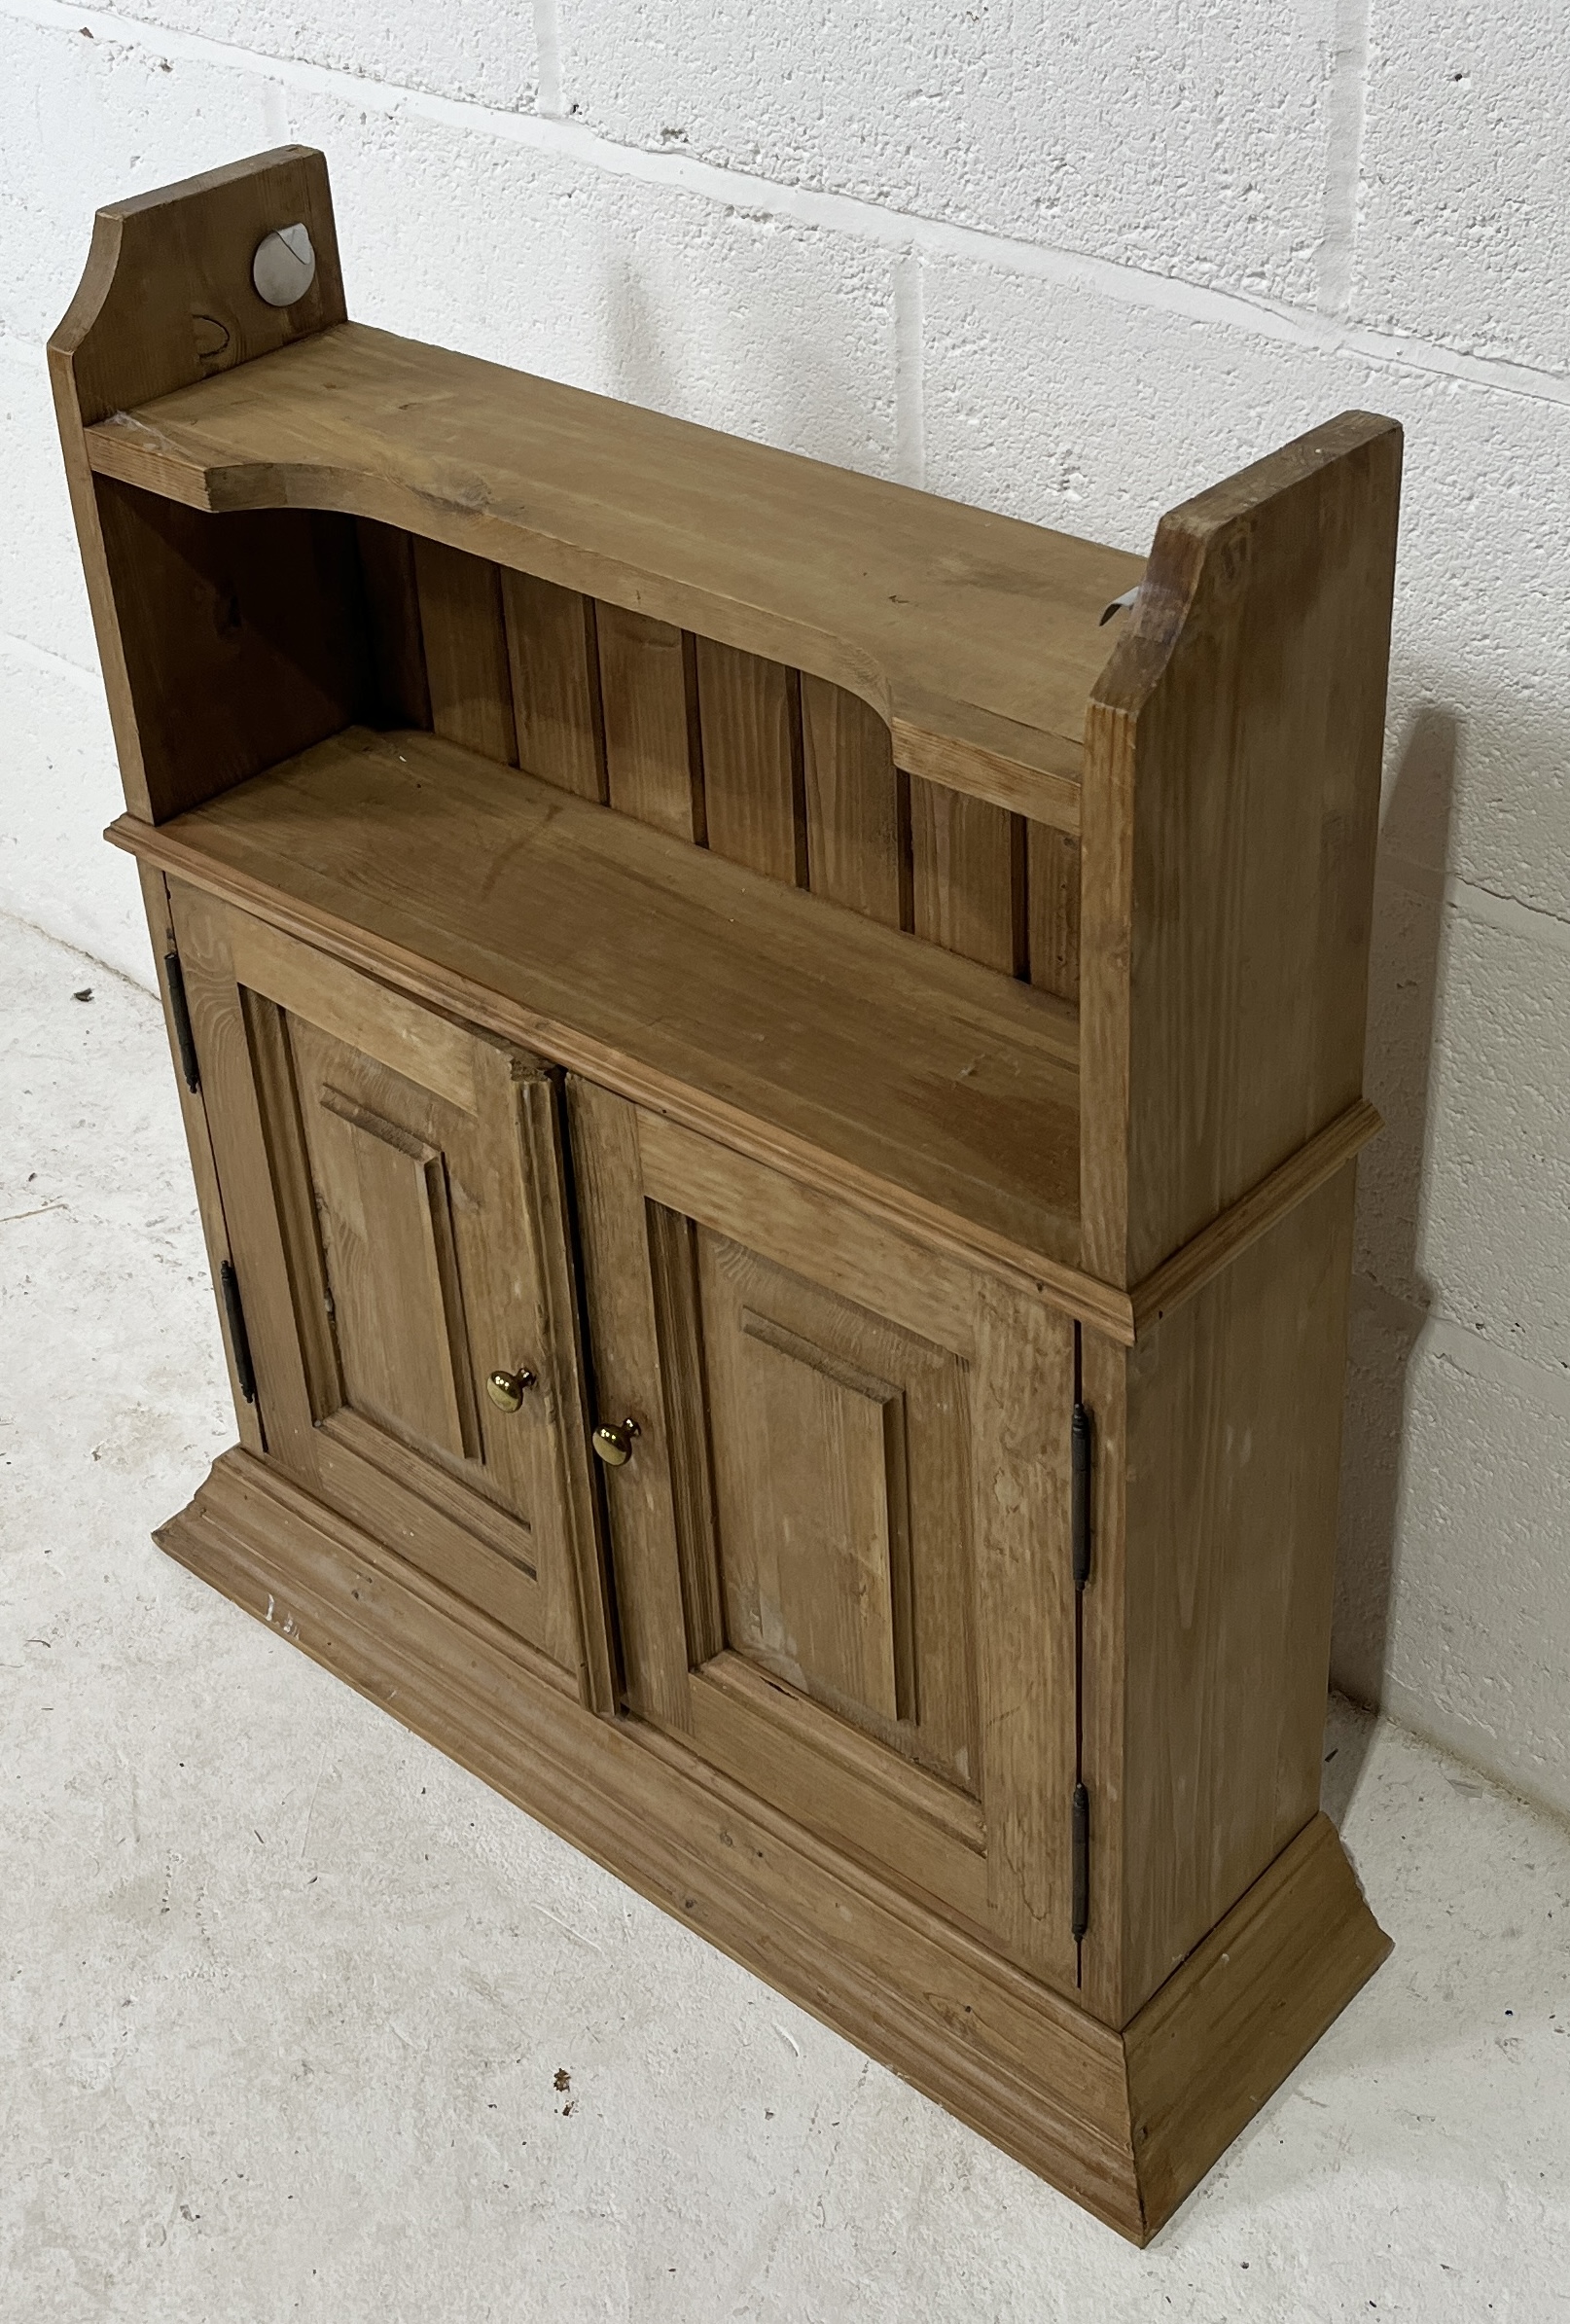 A small wall hanging pine cupboard with shelf above - Image 3 of 3